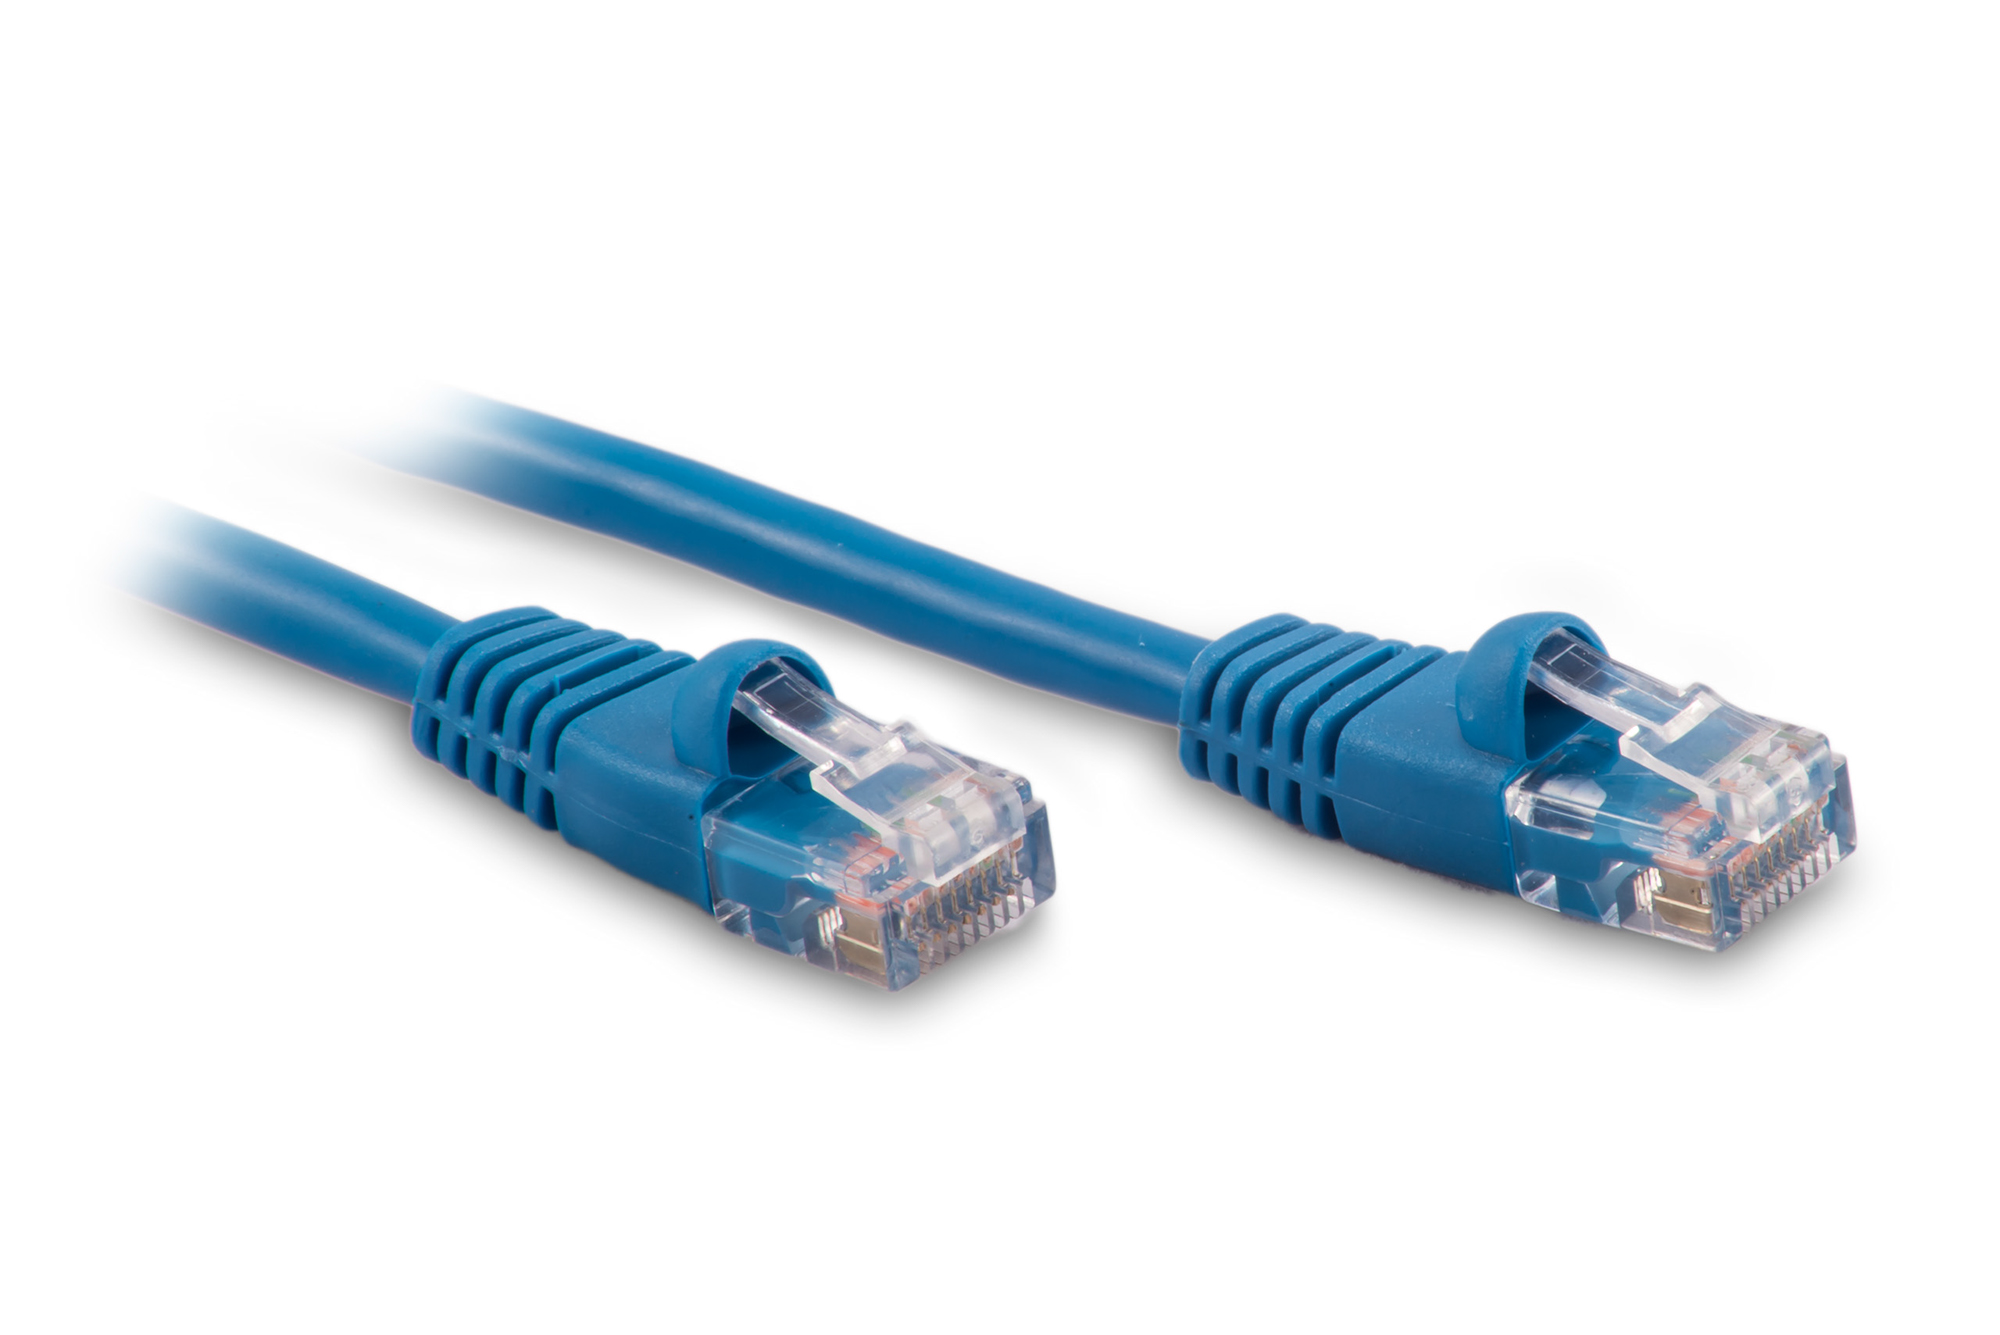 6FT Cat6 Ethernet Patch Cable - Blue Color - Snagless Boot